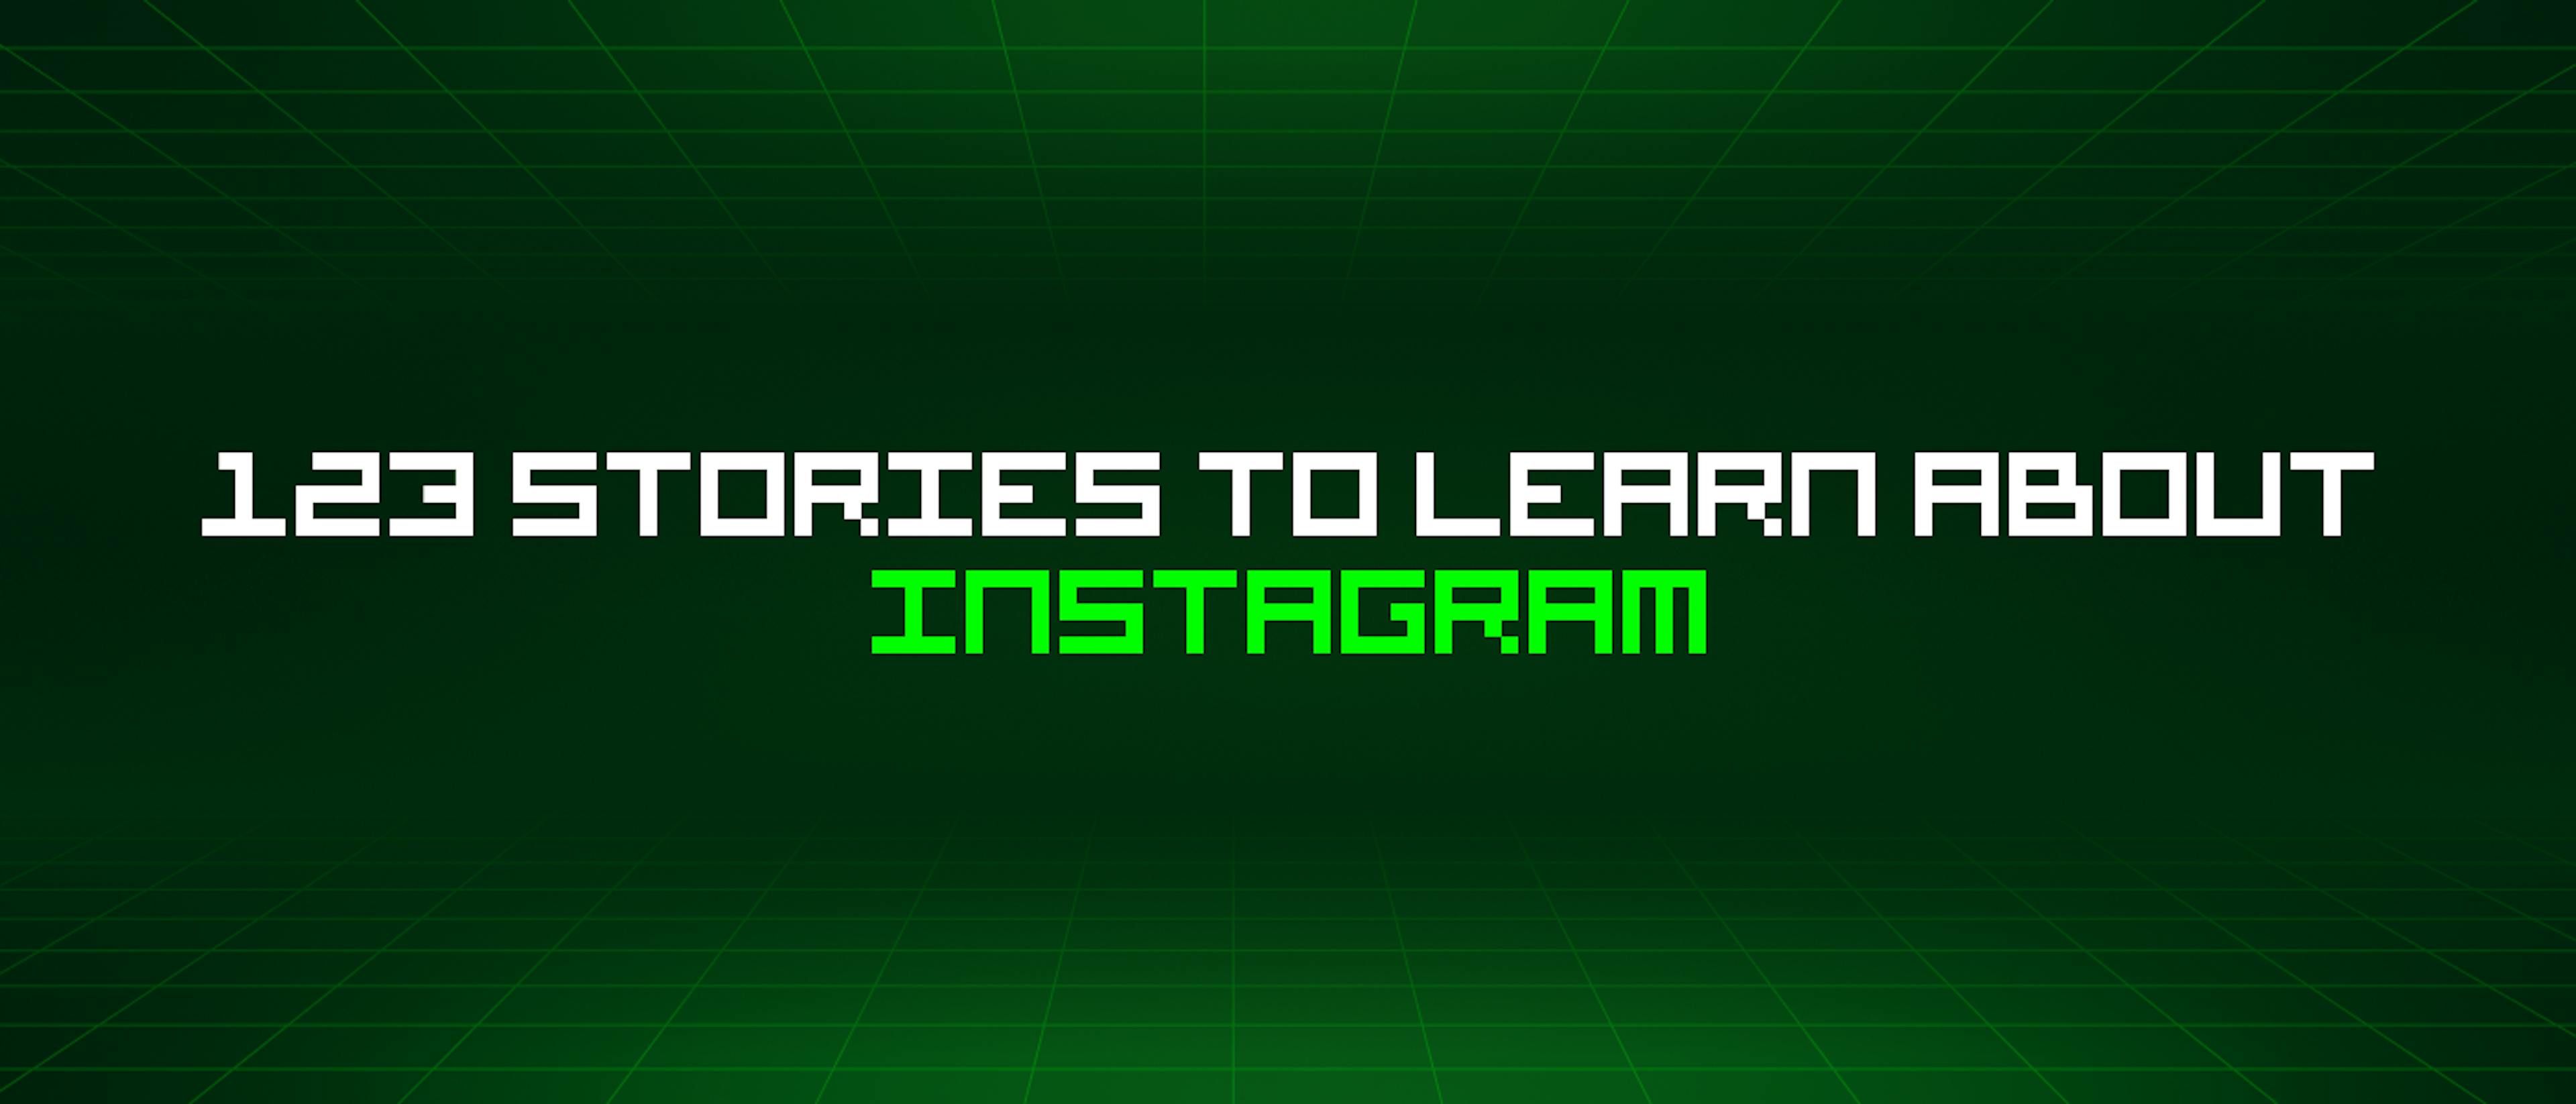 featured image - 123 Stories To Learn About Instagram